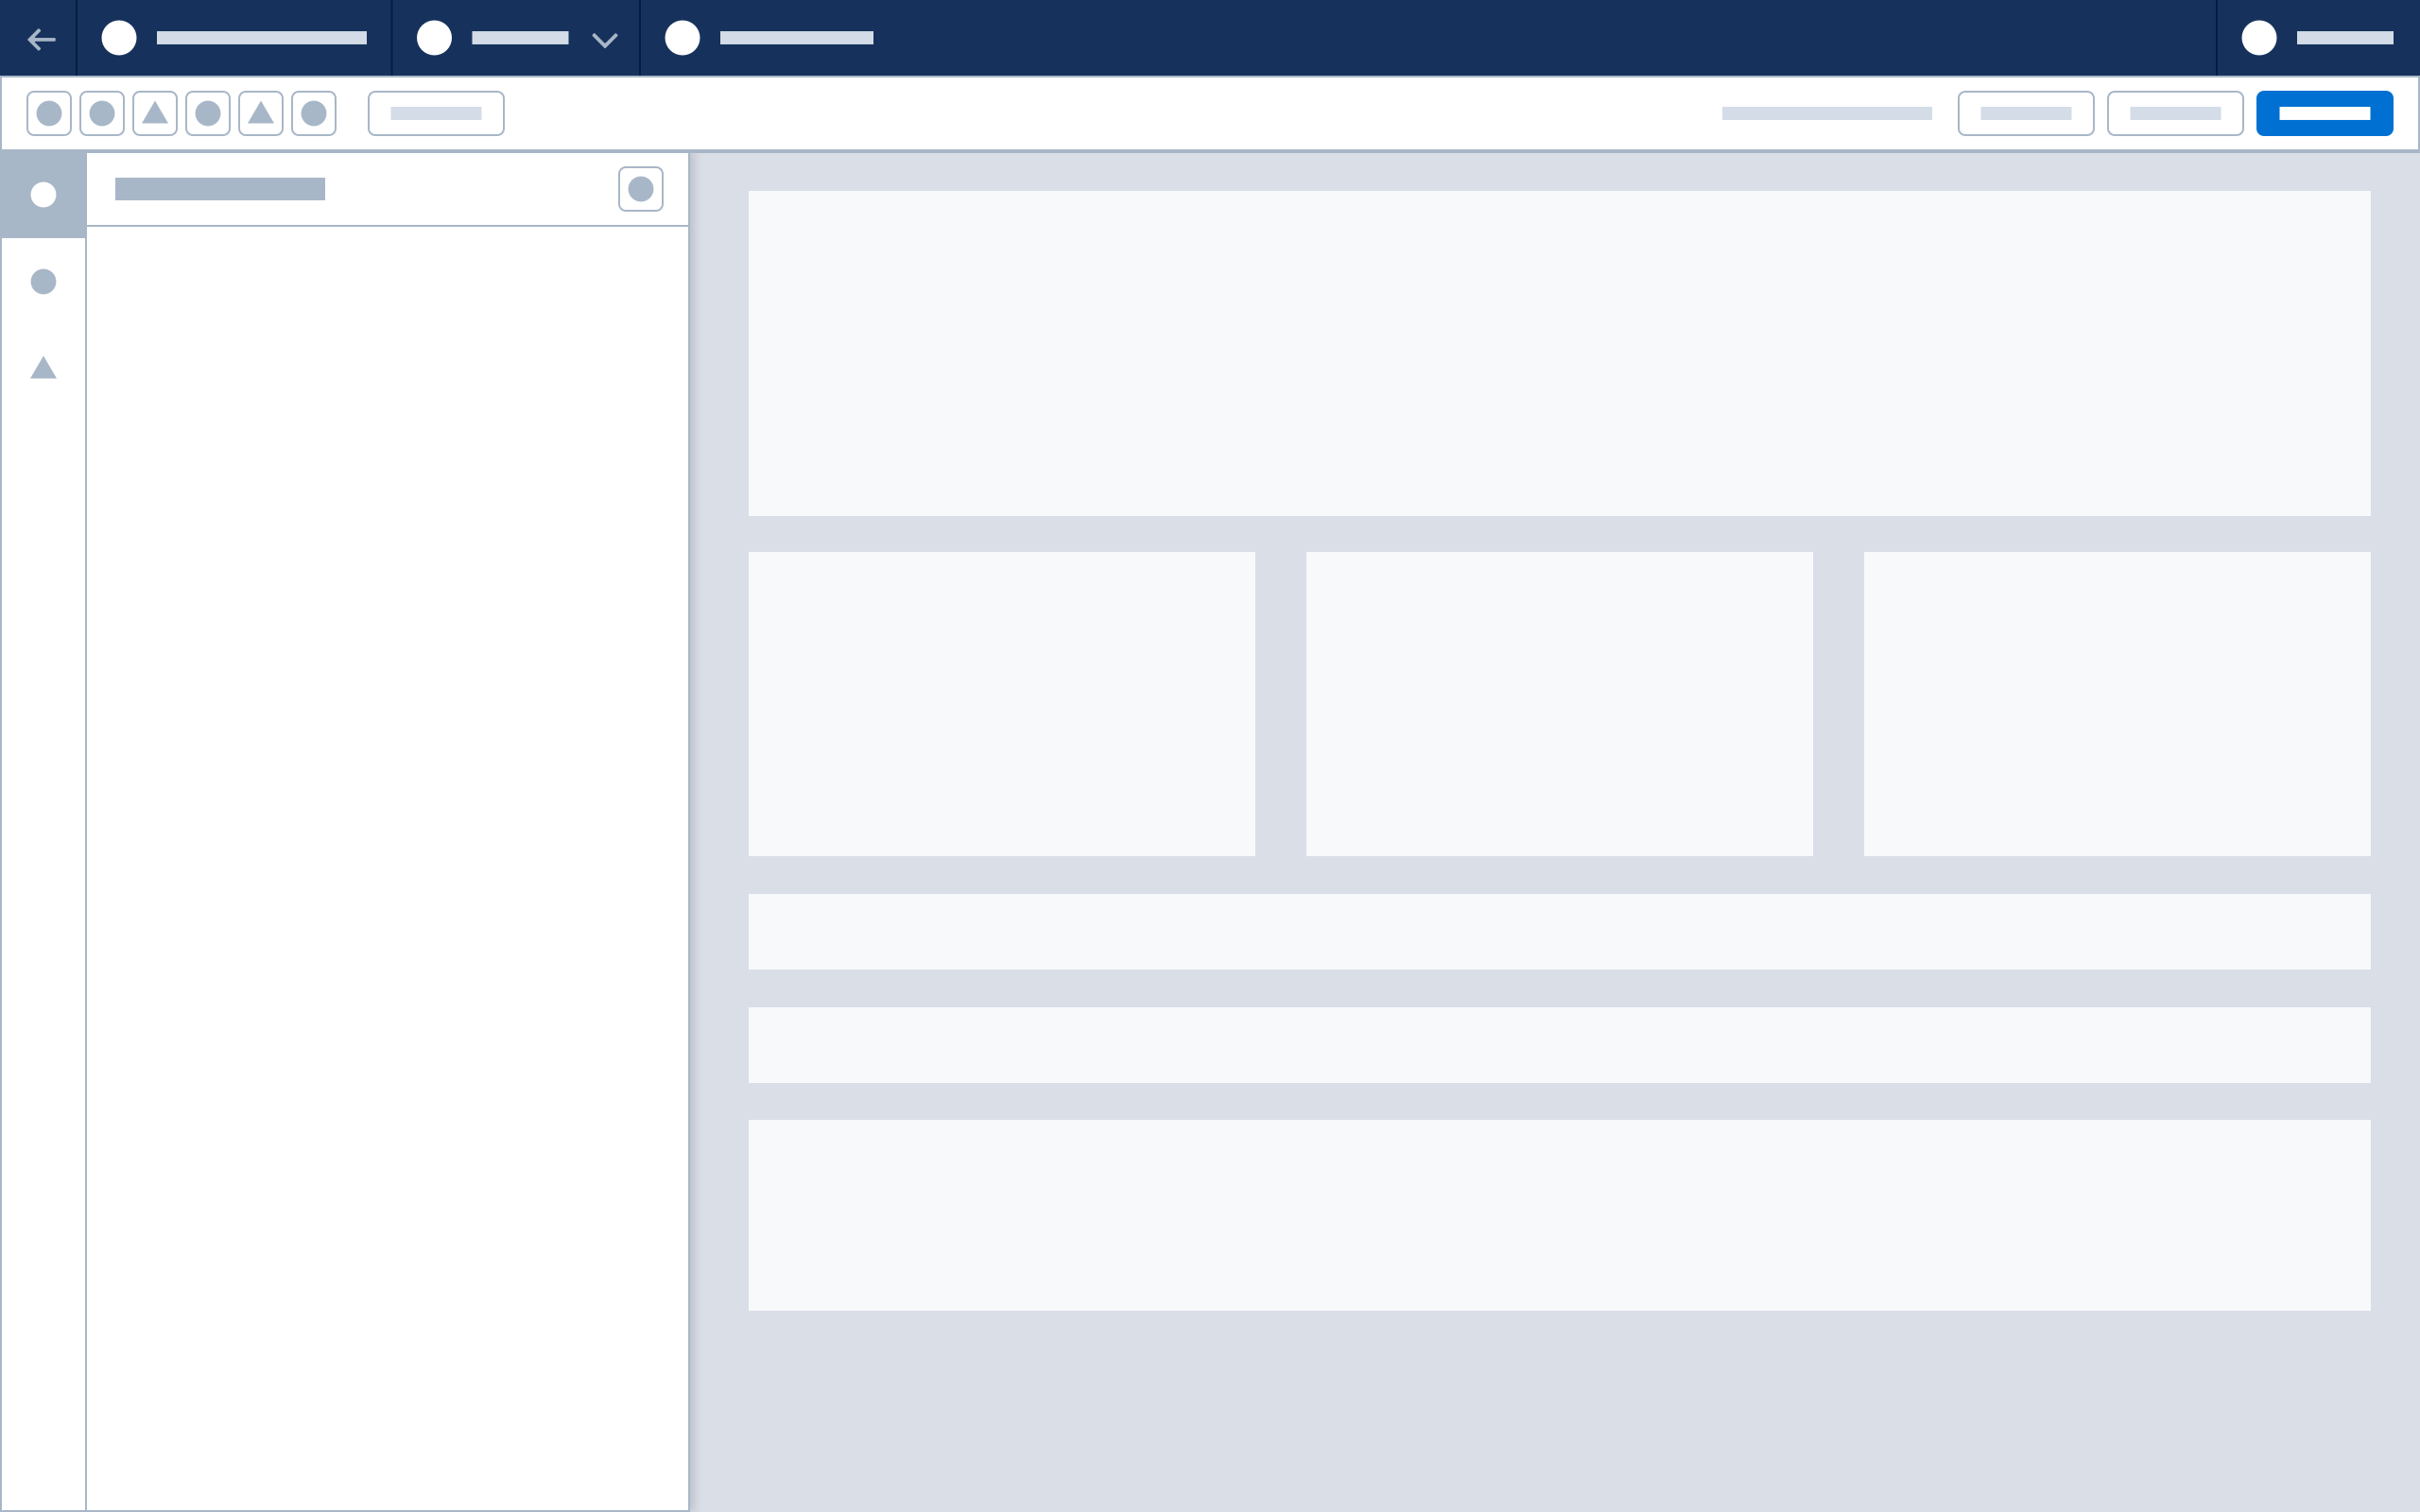 Wireframe showing the vertical tab bar.